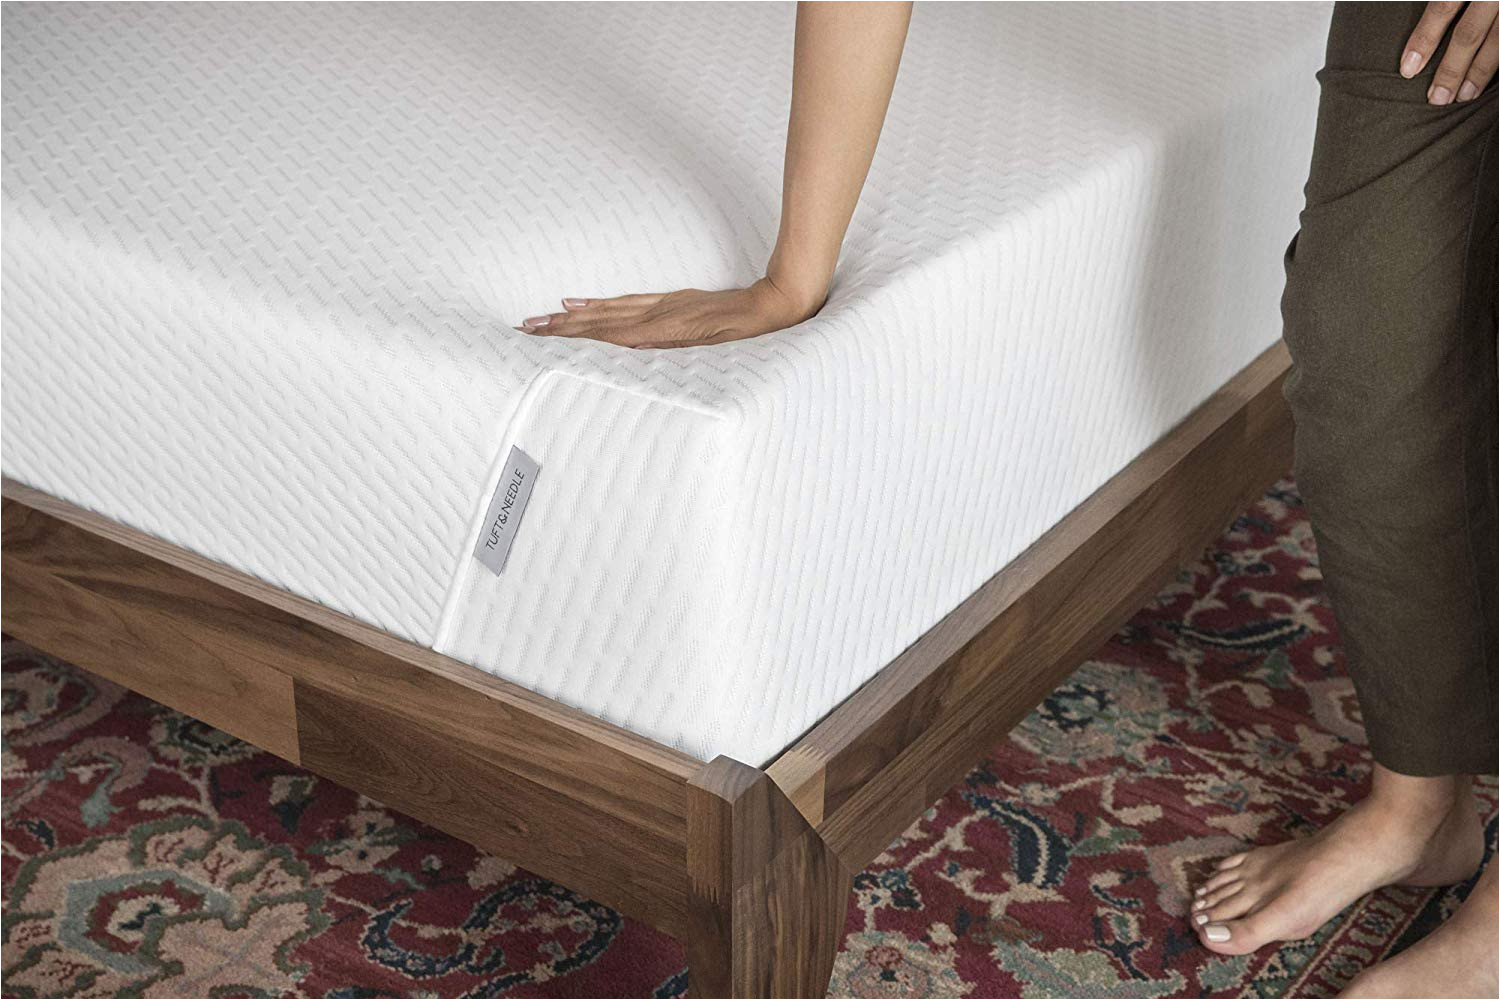 amazon com tuft needle queen mattress bed in a box t n adaptive foam sleeps cooler with more pressure relief support than memory foam